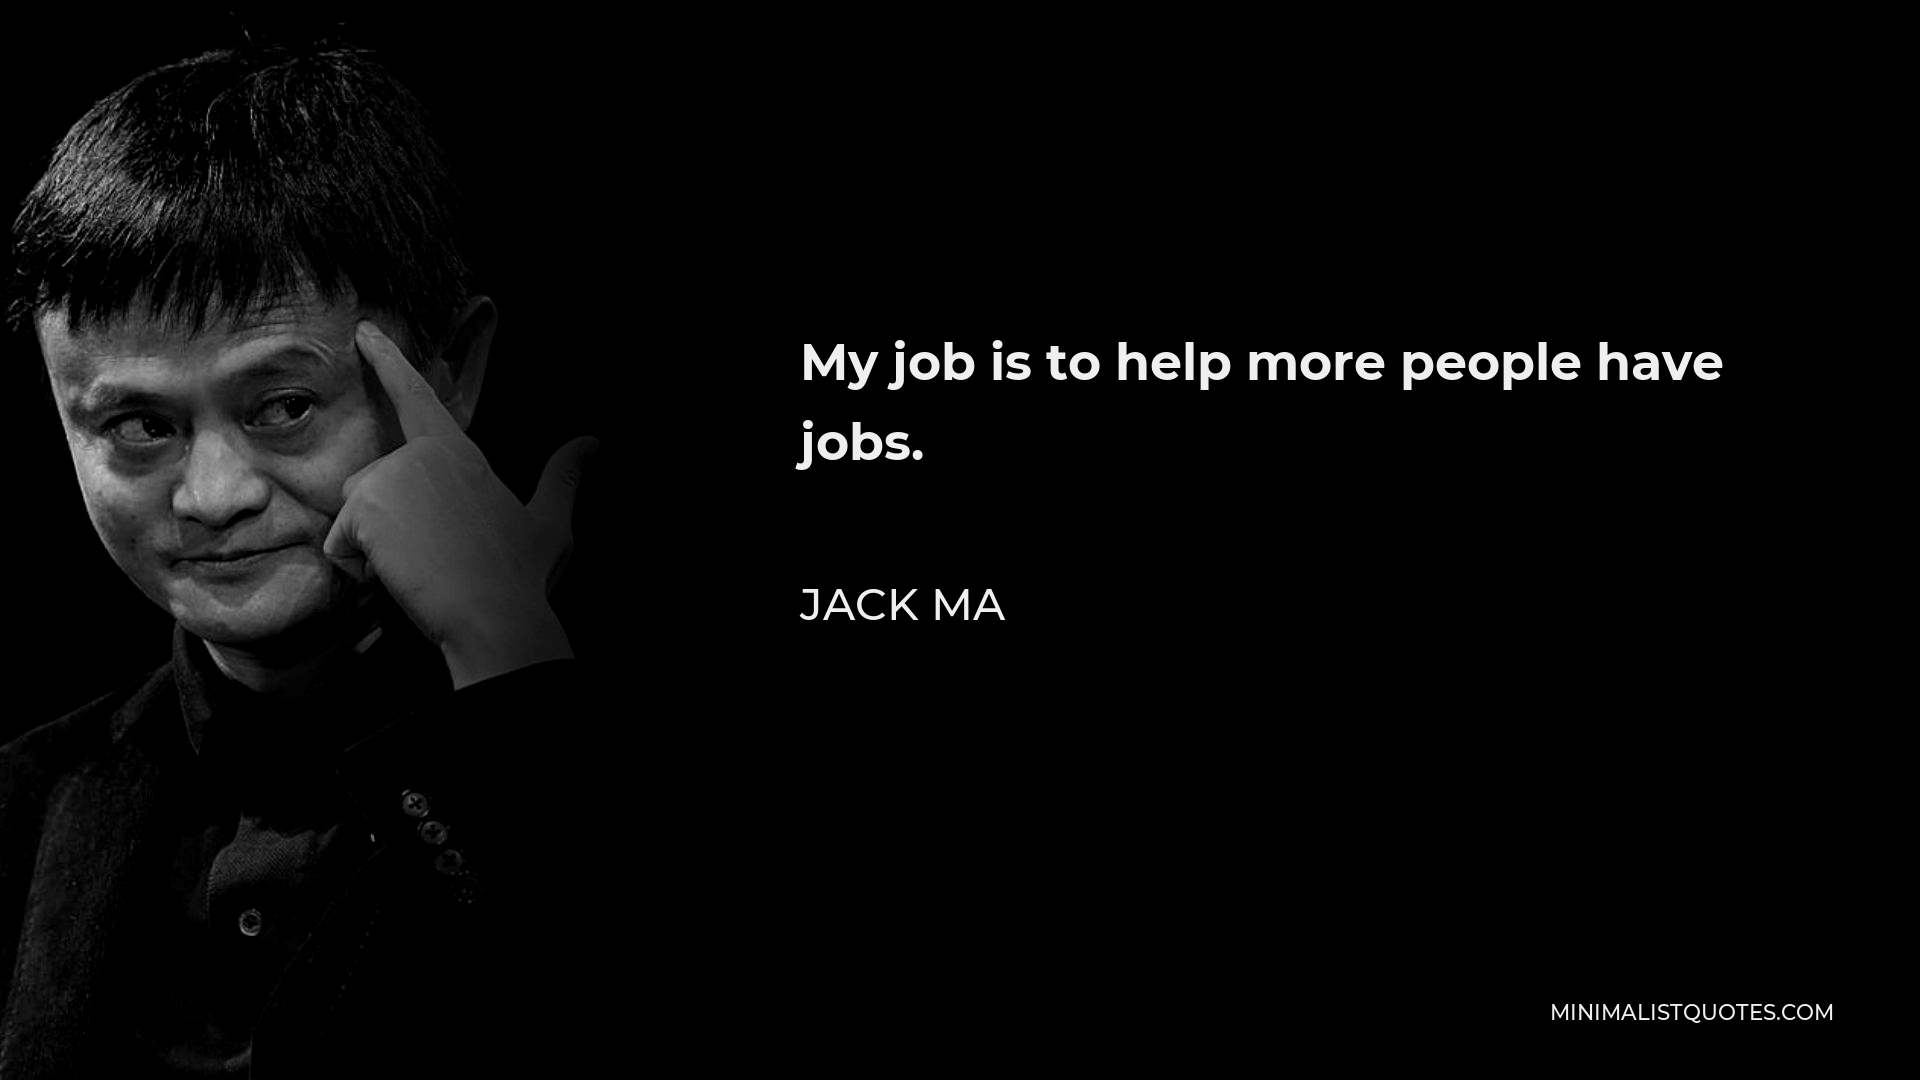 Jack Ma Quote - My job is to help more people have jobs.